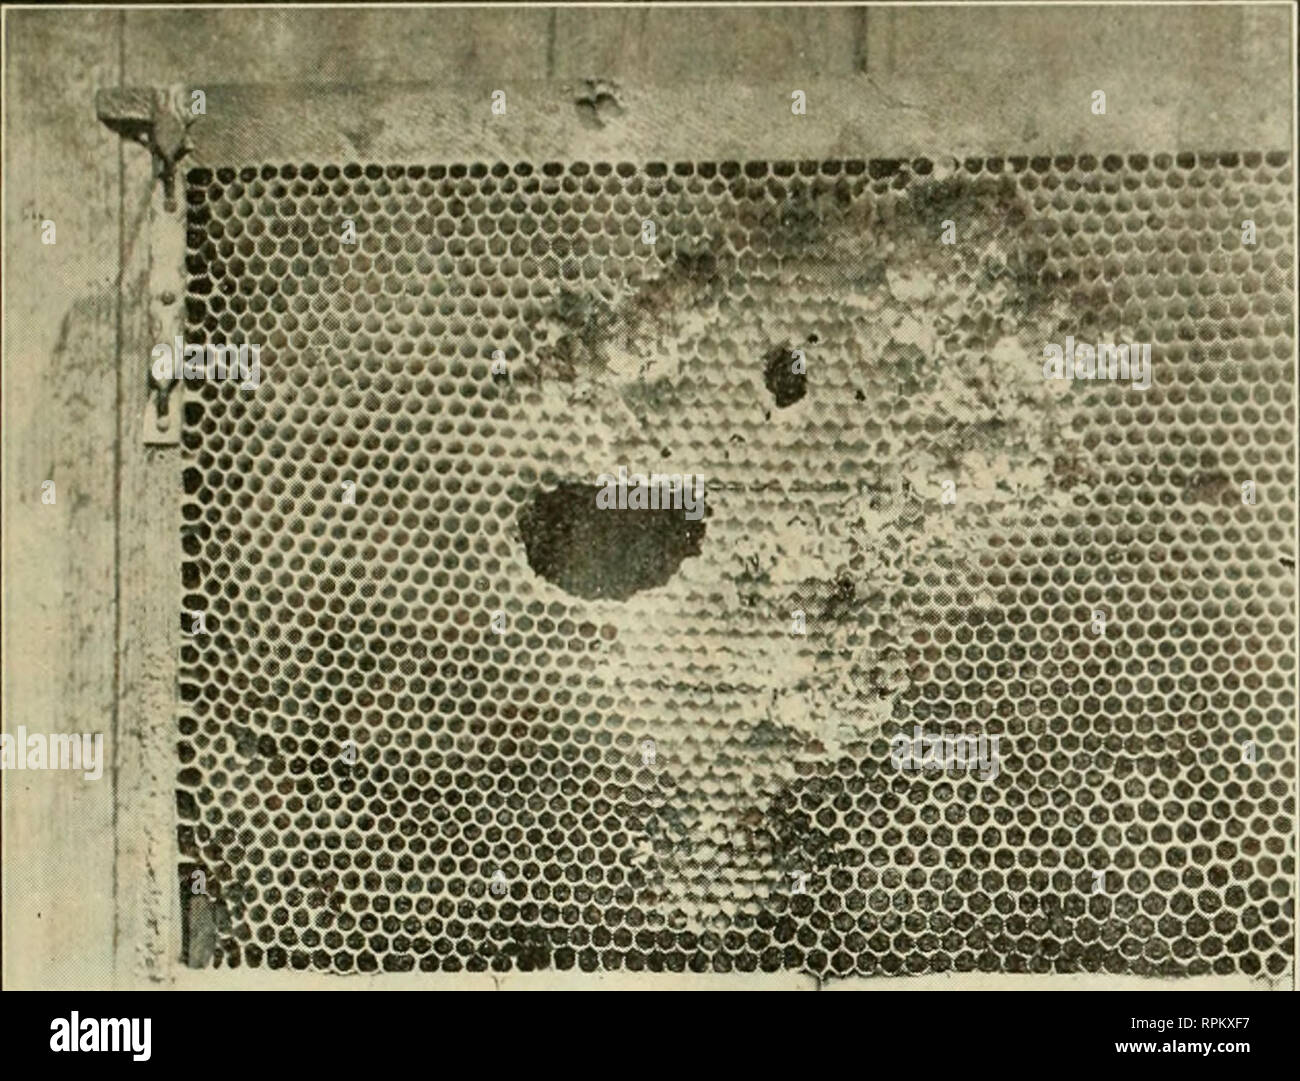 . American bee journal. Bee culture; Bees. July, I9n;. 225 American Hee JournaTjl. FIG. 5.—HOLE IN BROOD-COMB GNAWED BY MICE harder the bees he has or keep more bees ? The second man must either push harder or maintain present aver- age with less labor. The relation of equipment to cost of operation is a delicate one. It is easy to put too much money into equipment and it is equally as easy to add mate- rially to one's labor by insufficient or poorly made and ill-fitting apparatus. There is a fine field for the exercise of good judgment in the matter of equip- ment. Taking the case of the spec Stock Photo